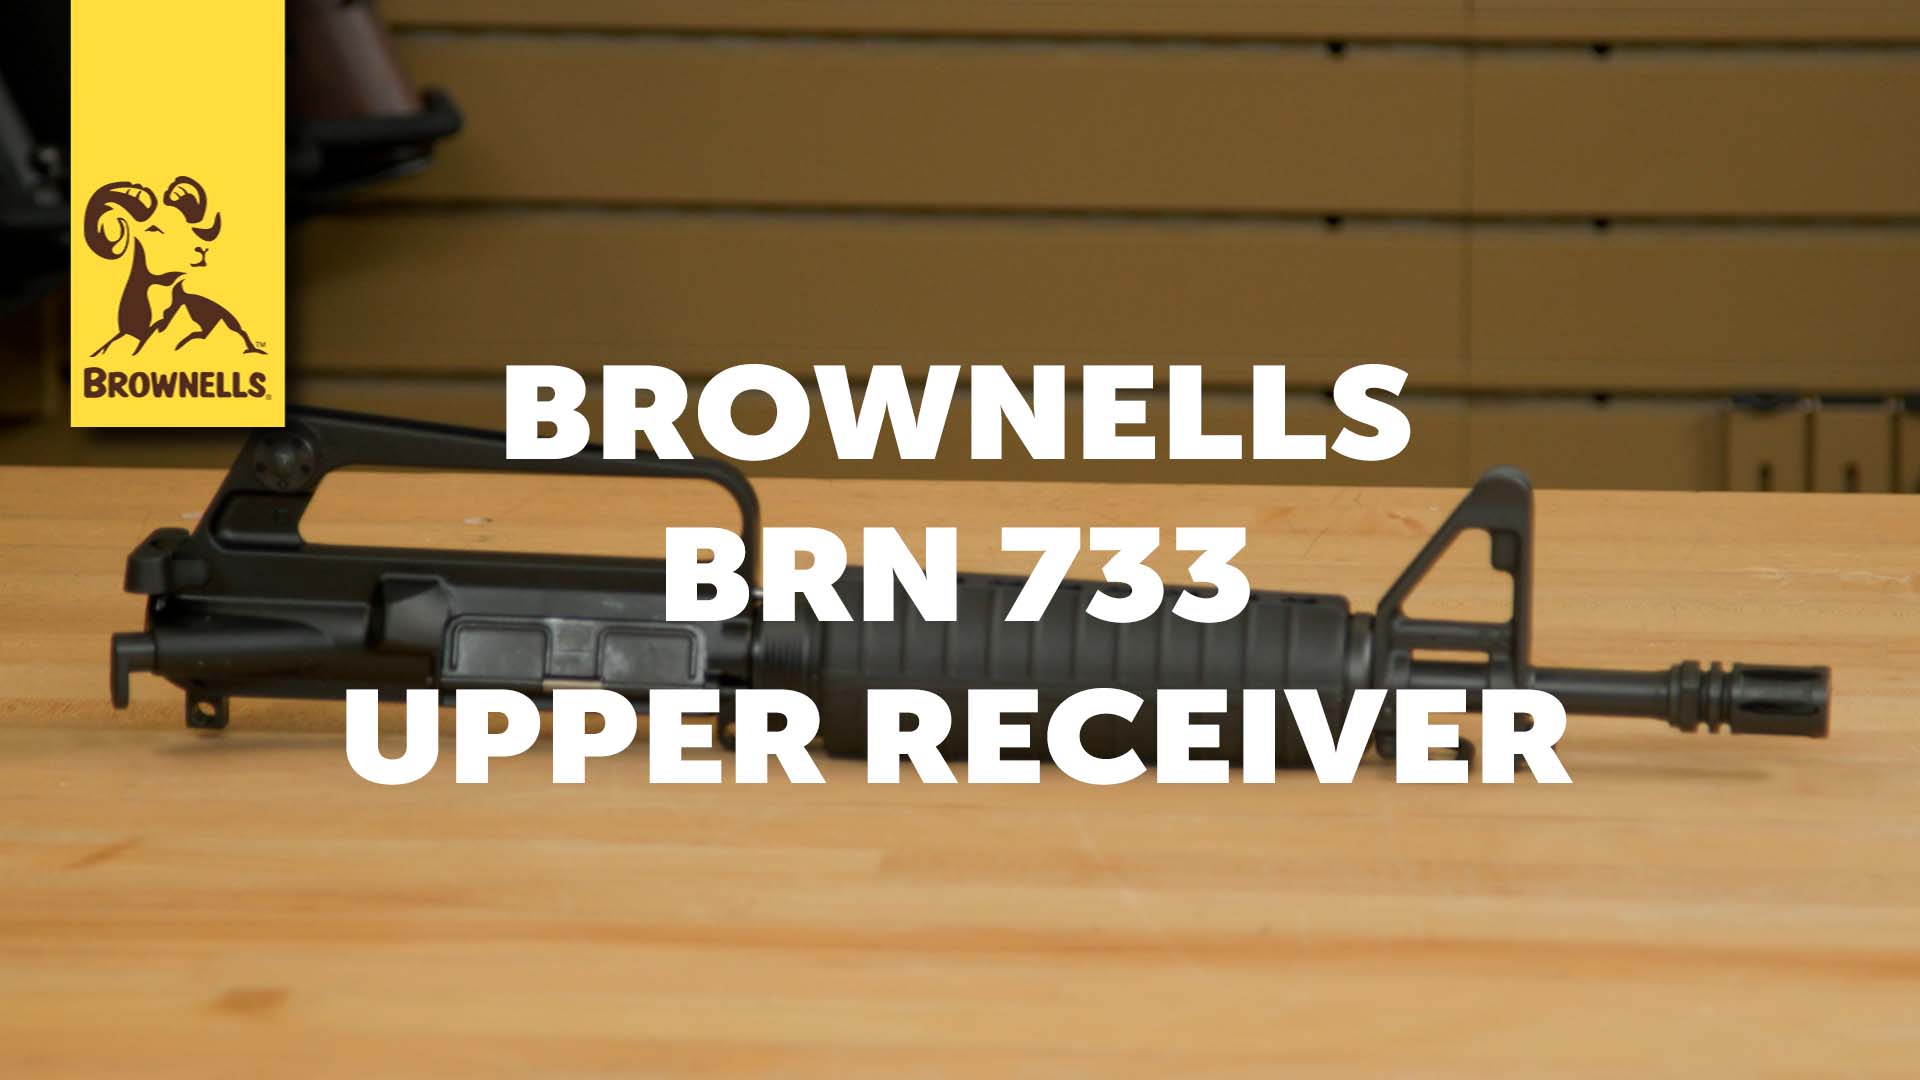 Product Spotlight: The Brownells 733 Upper Receiver